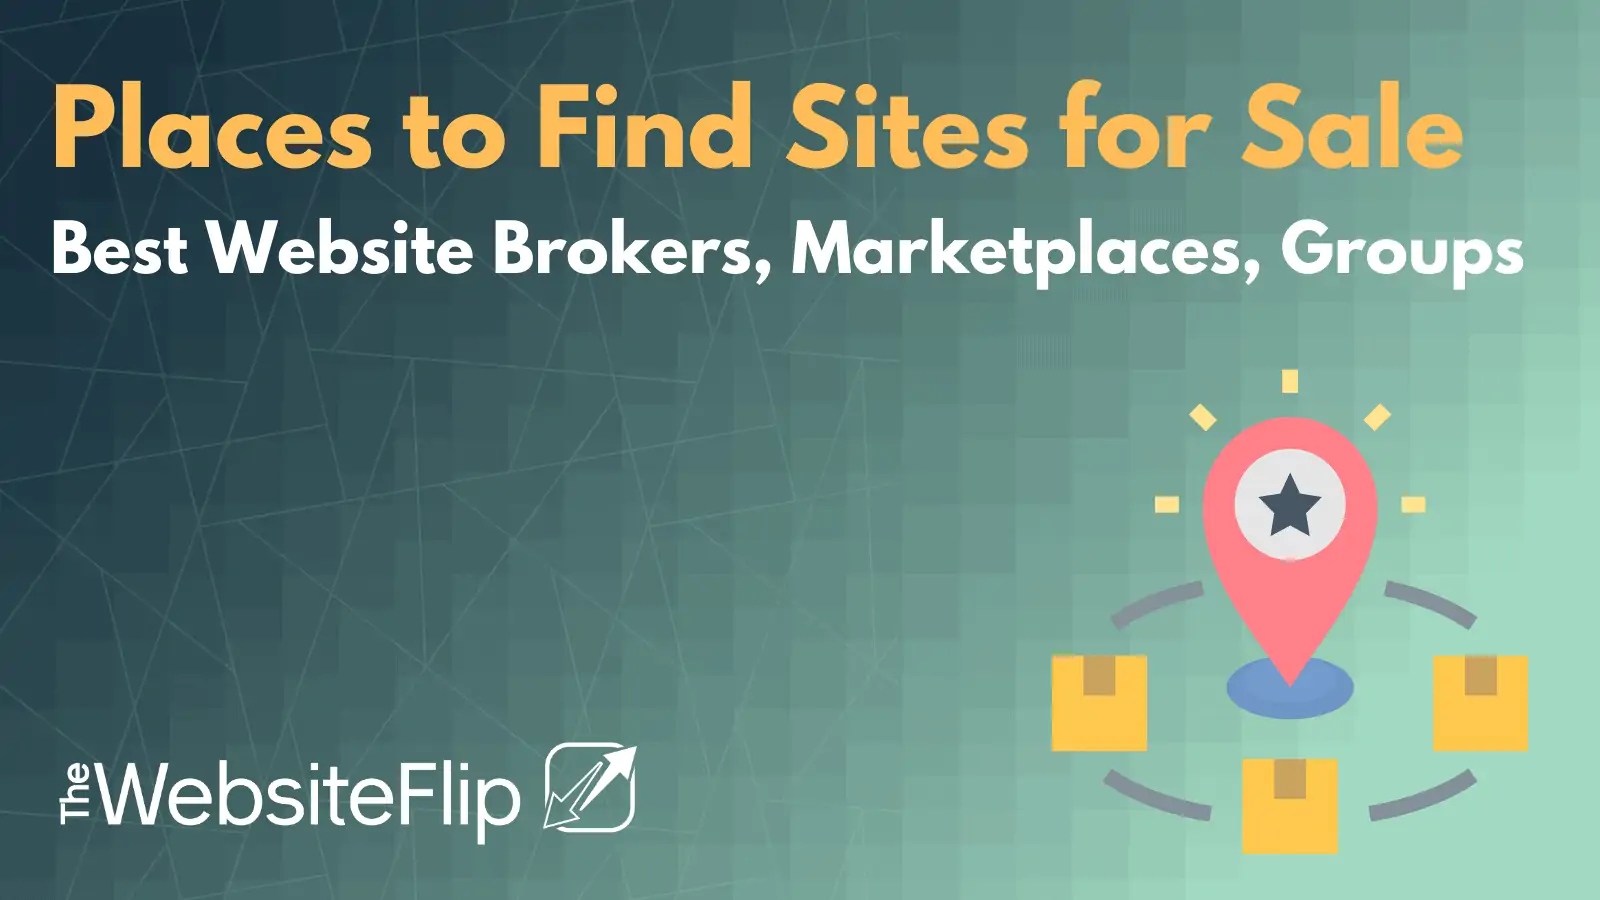 Places to find sites for sale